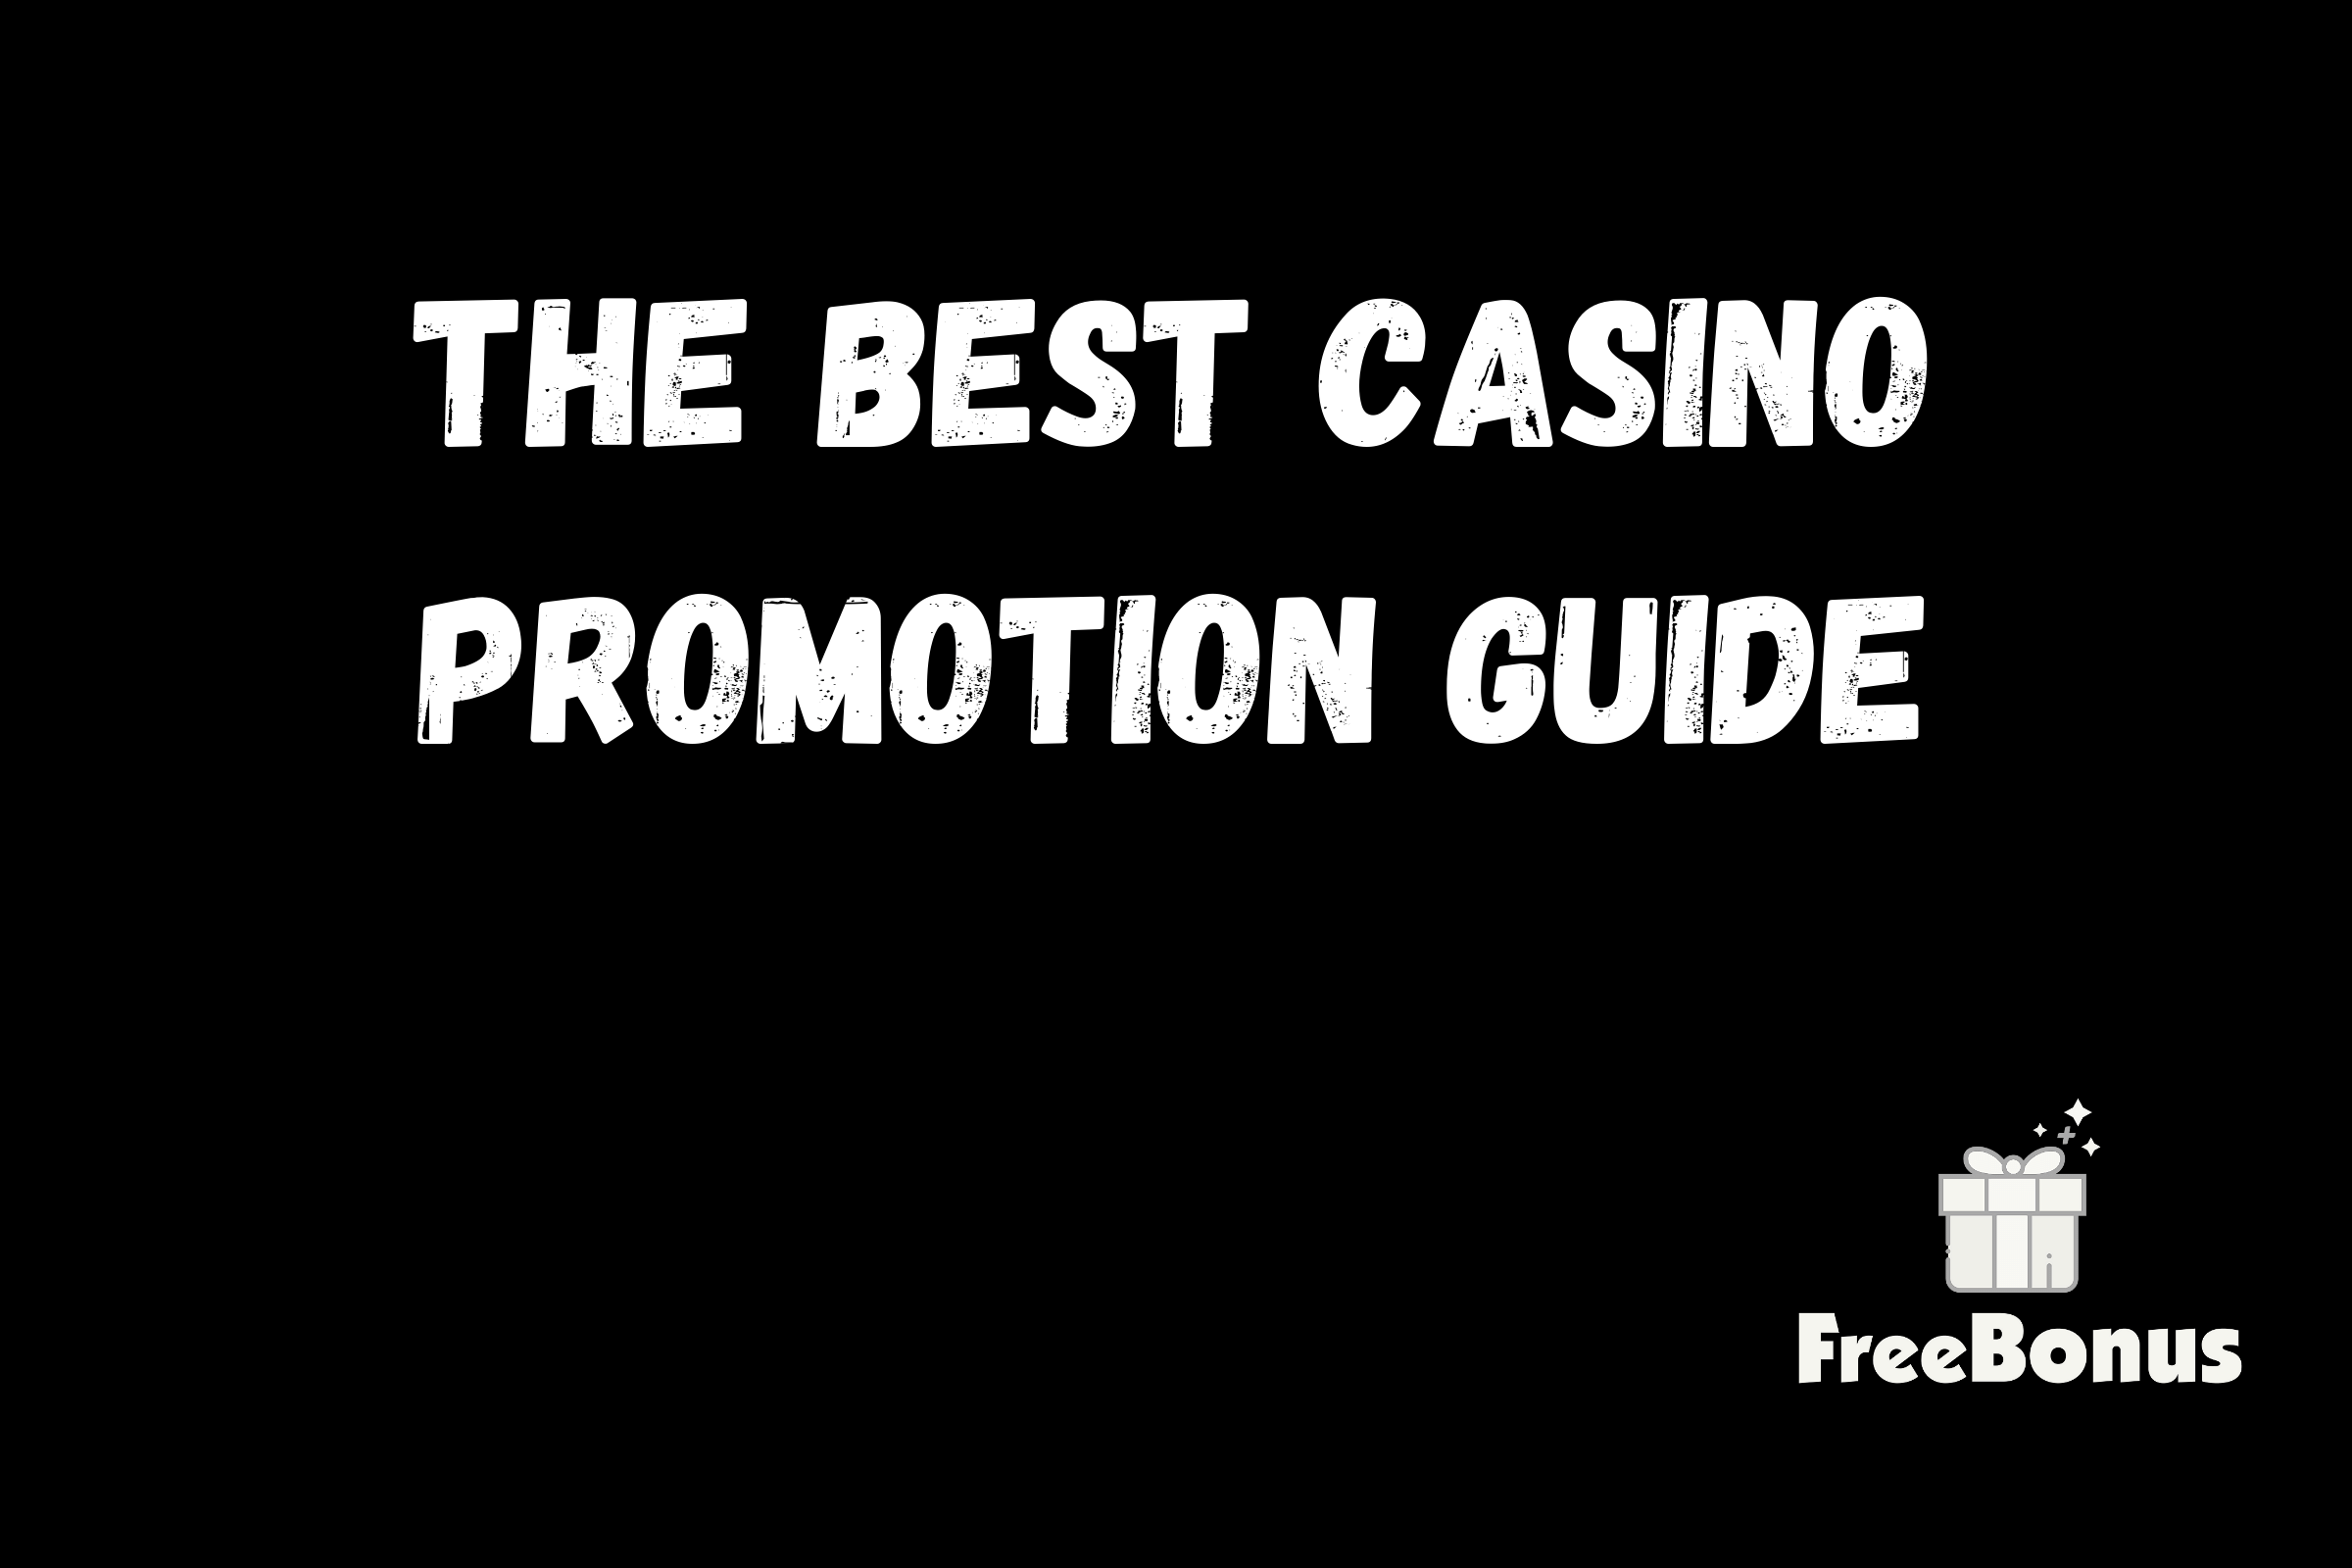 The Best Casino Promotion Guide